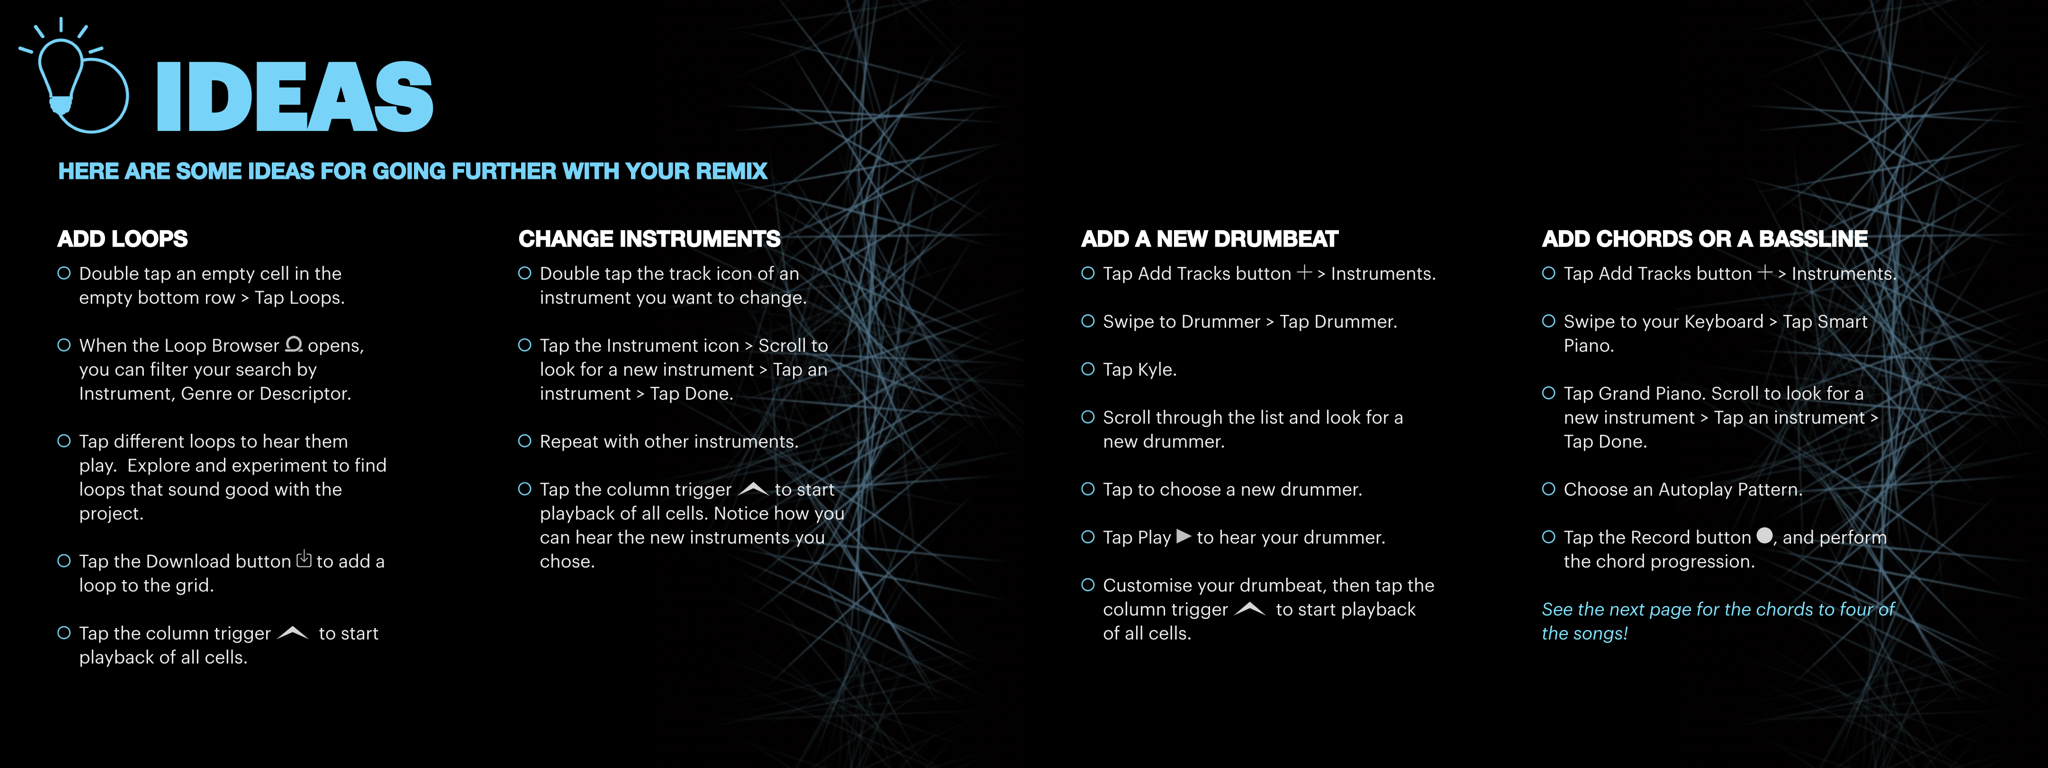 Two screenshots from REMIX with GarageBand for iPad. Two images from the Ideas section are shown, with instructional text.